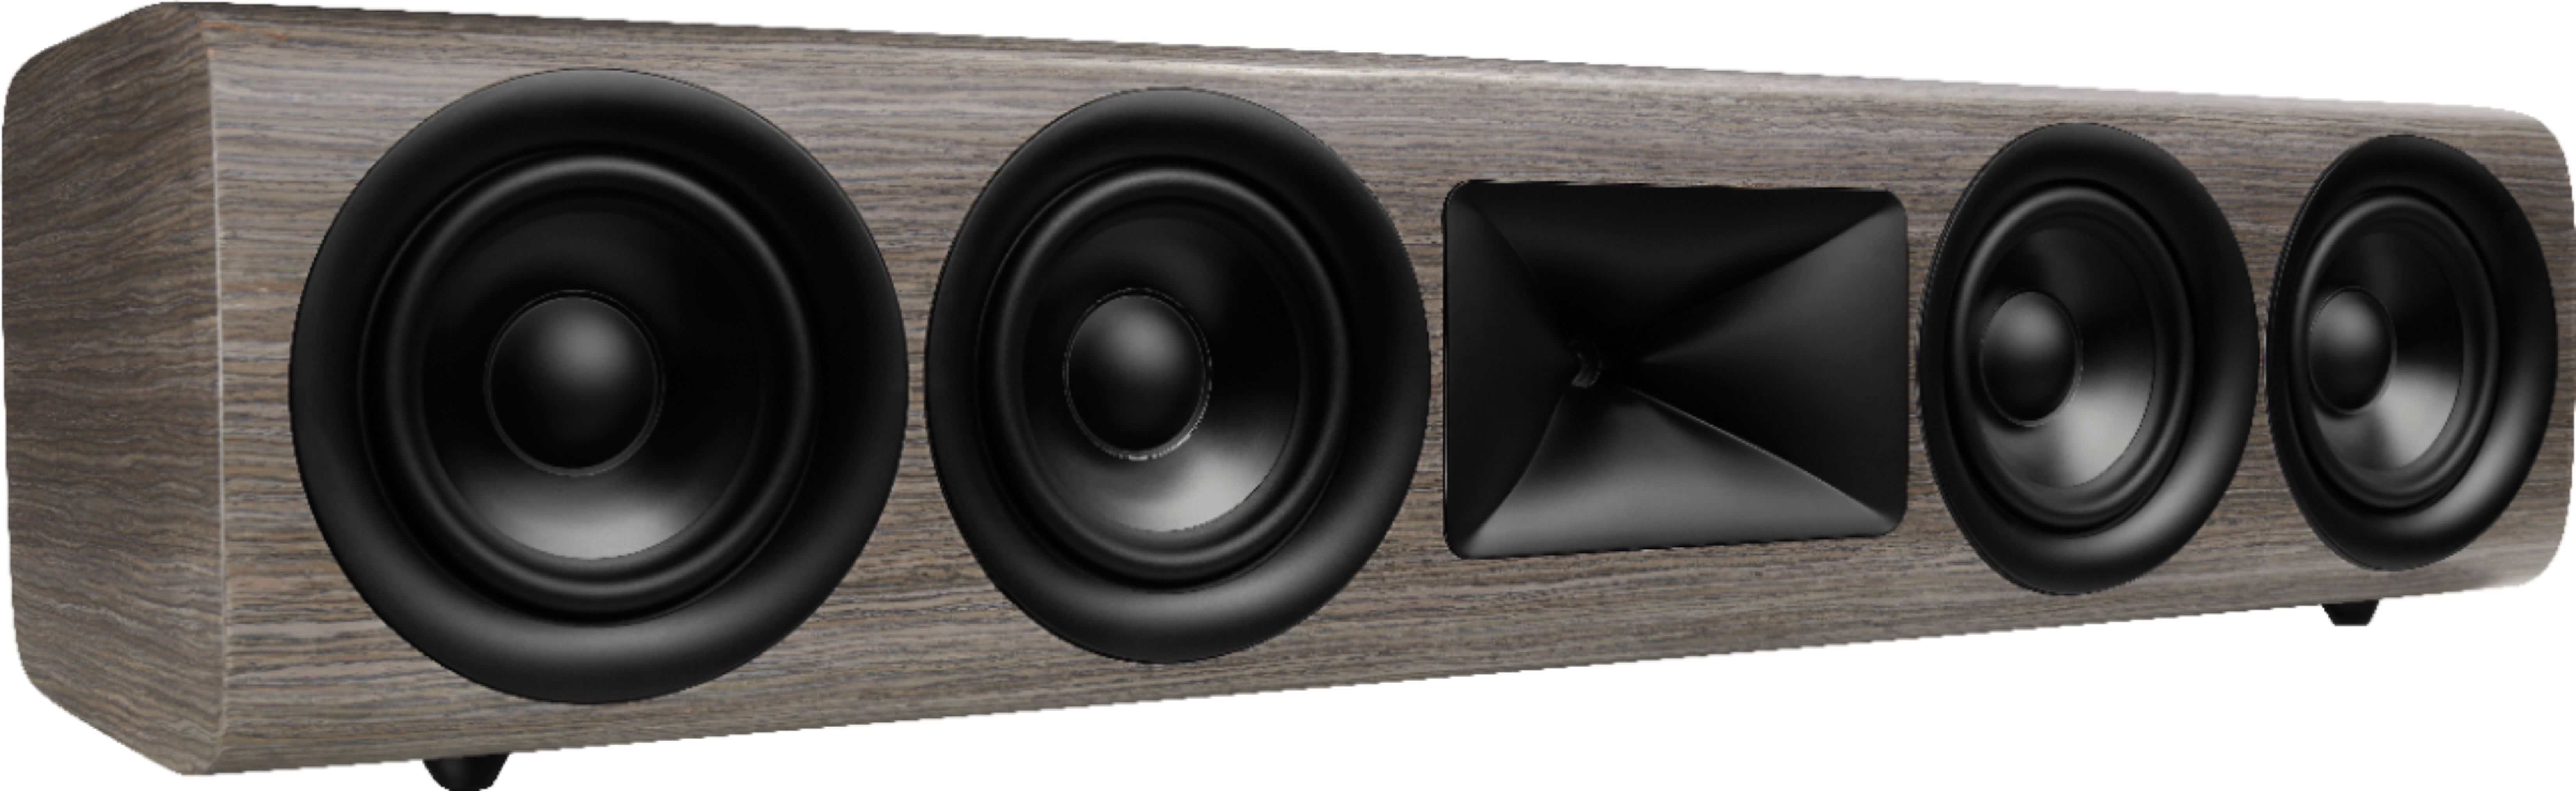 Angle View: JBL - HDI4500 Quadruple 5.25" 2-1/2 way Center Channel Loudspeaker with 1" compression tweeter - Gray Oak Finish